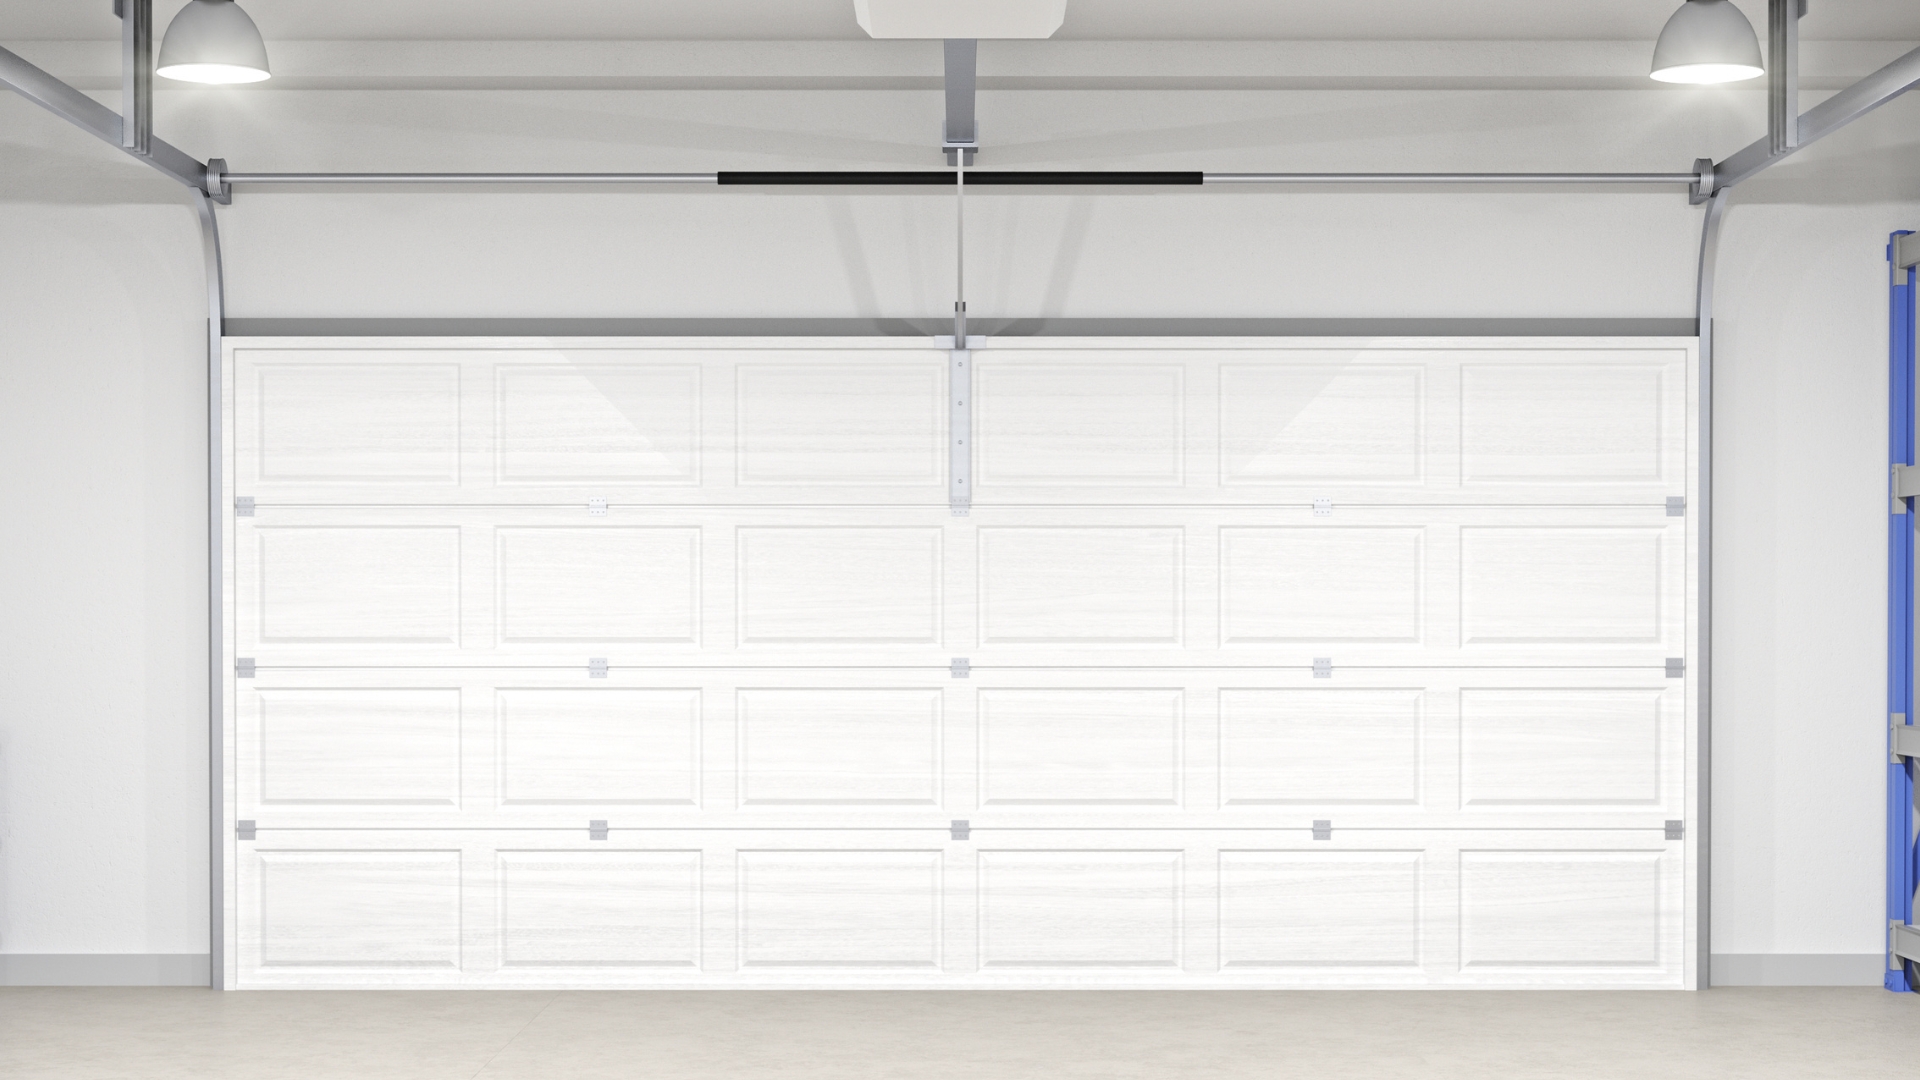 A garage door with a two-spring system